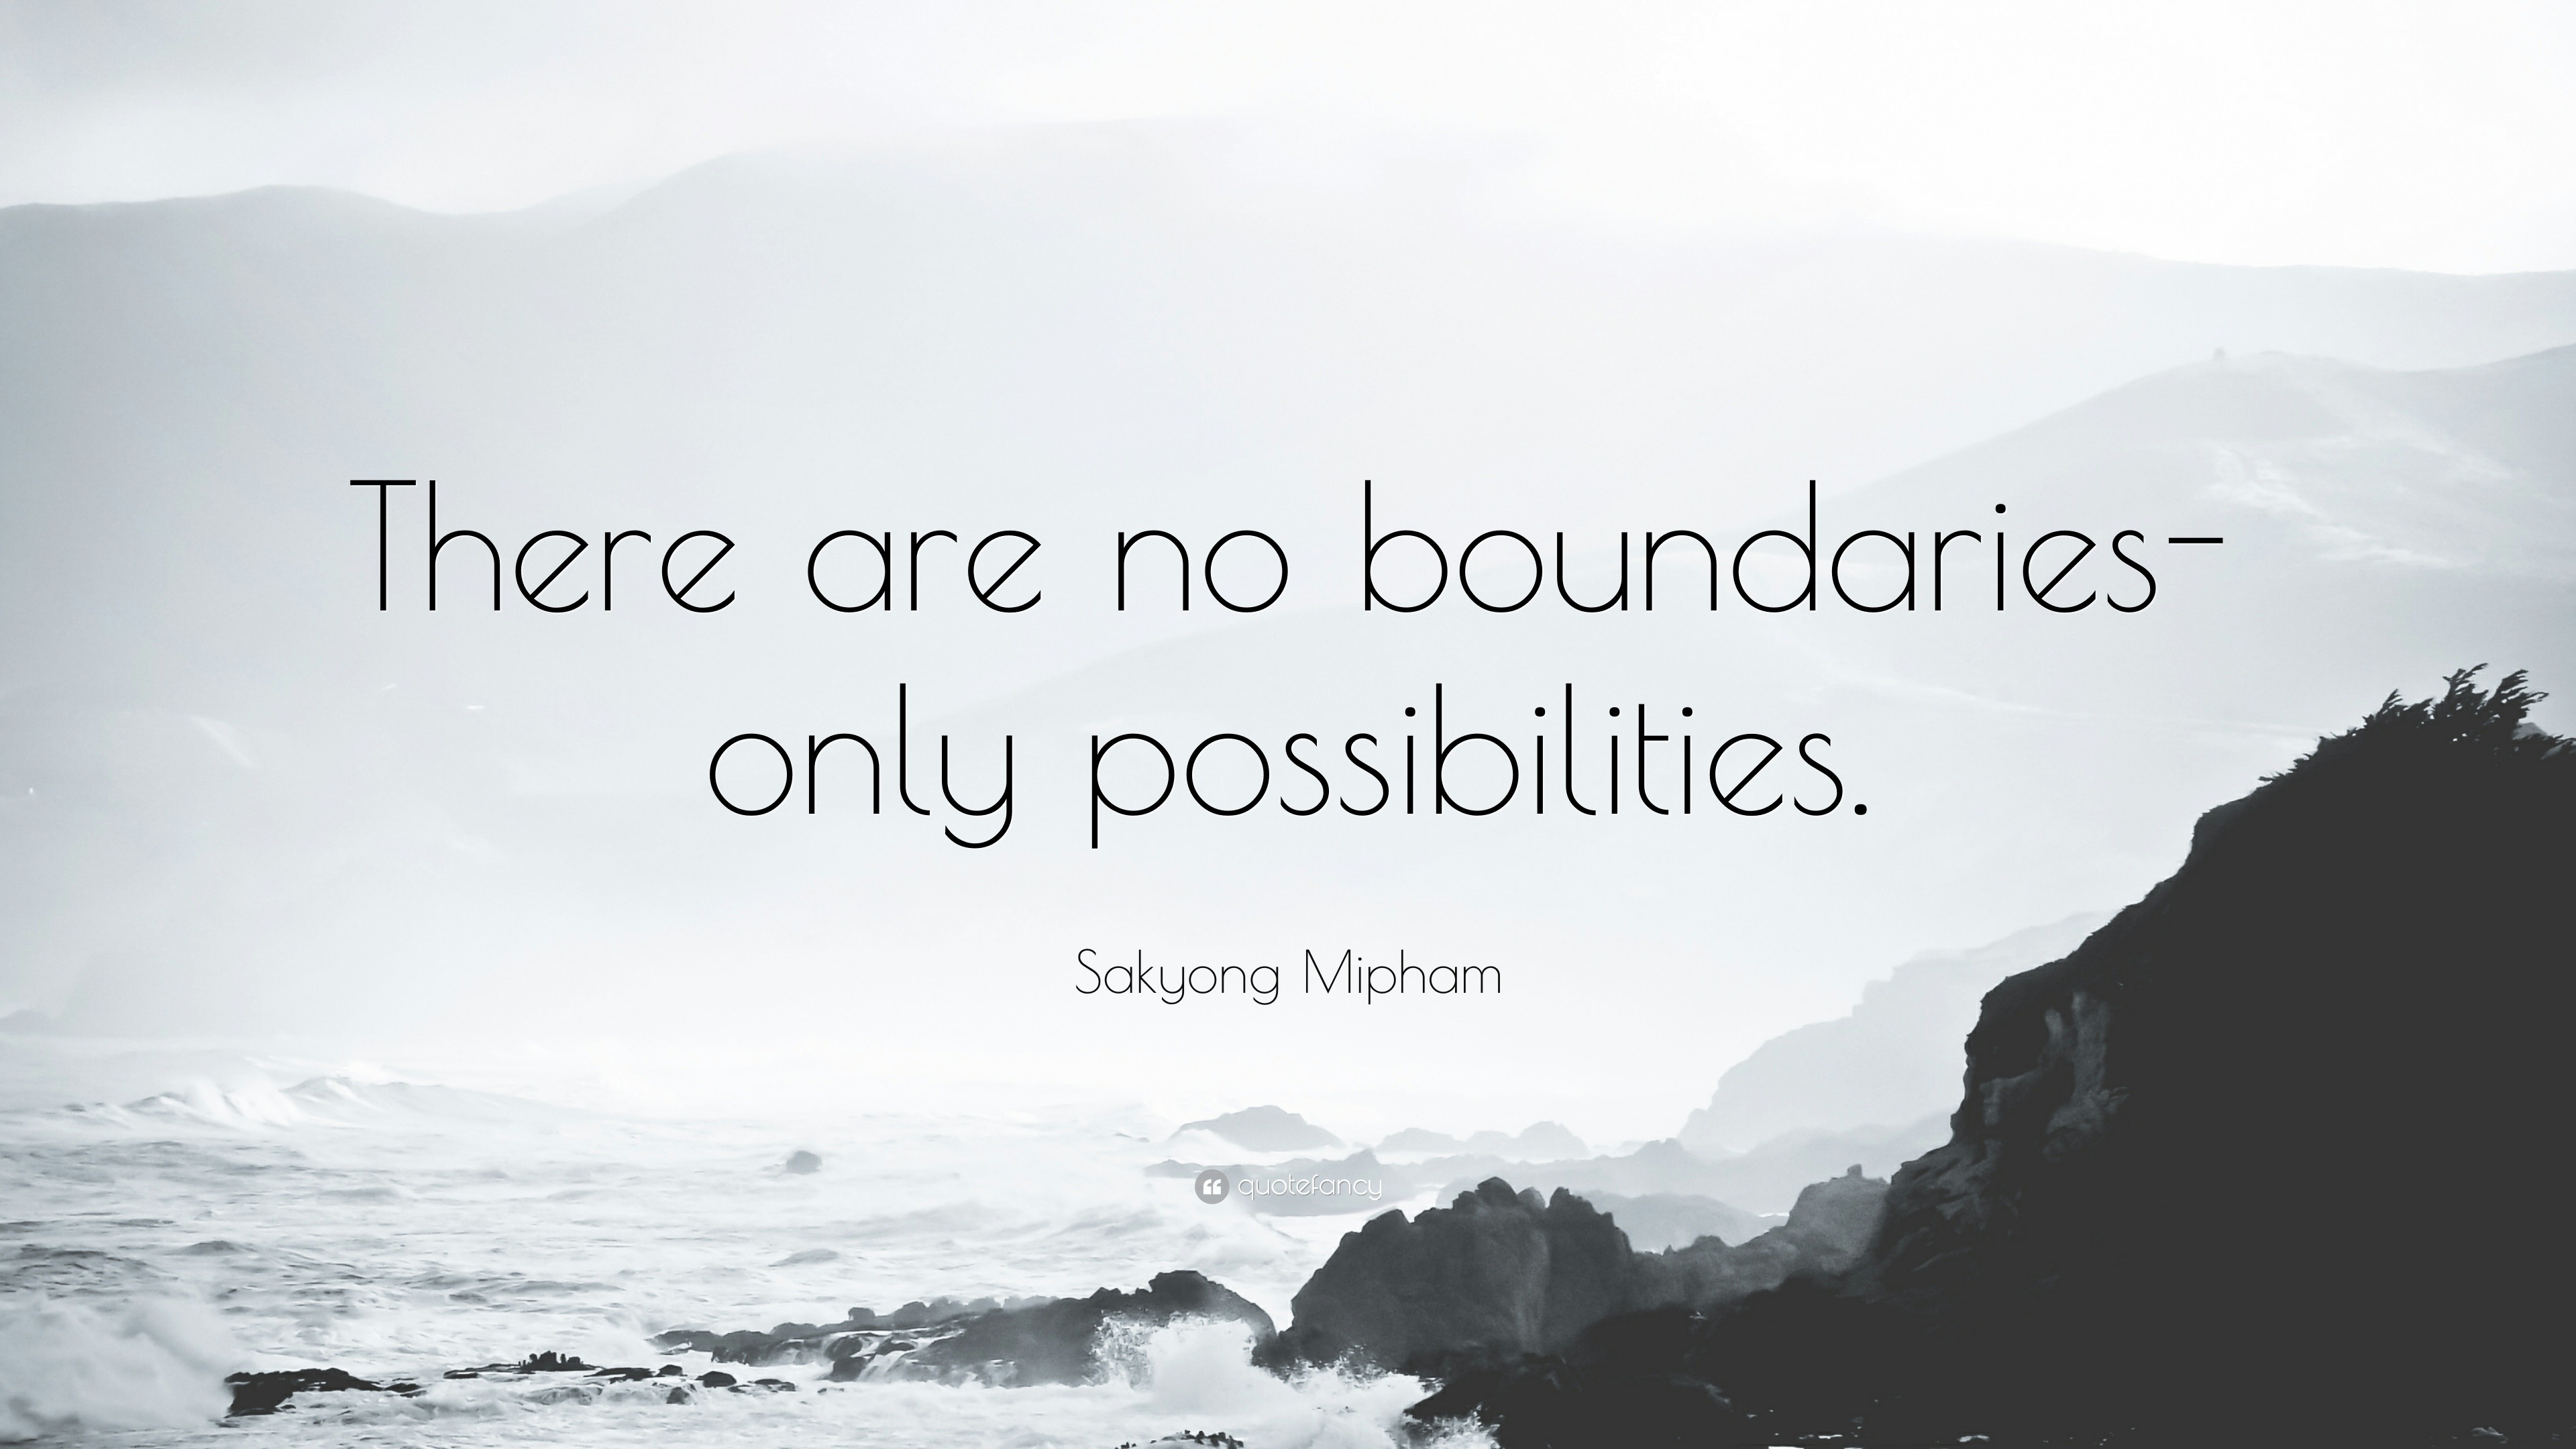 https://quotefancy.com/media/wallpaper/3840x2160/787809-Sakyong-Mipham-Quote-There-are-no-boundaries-only-possibilities.jpg